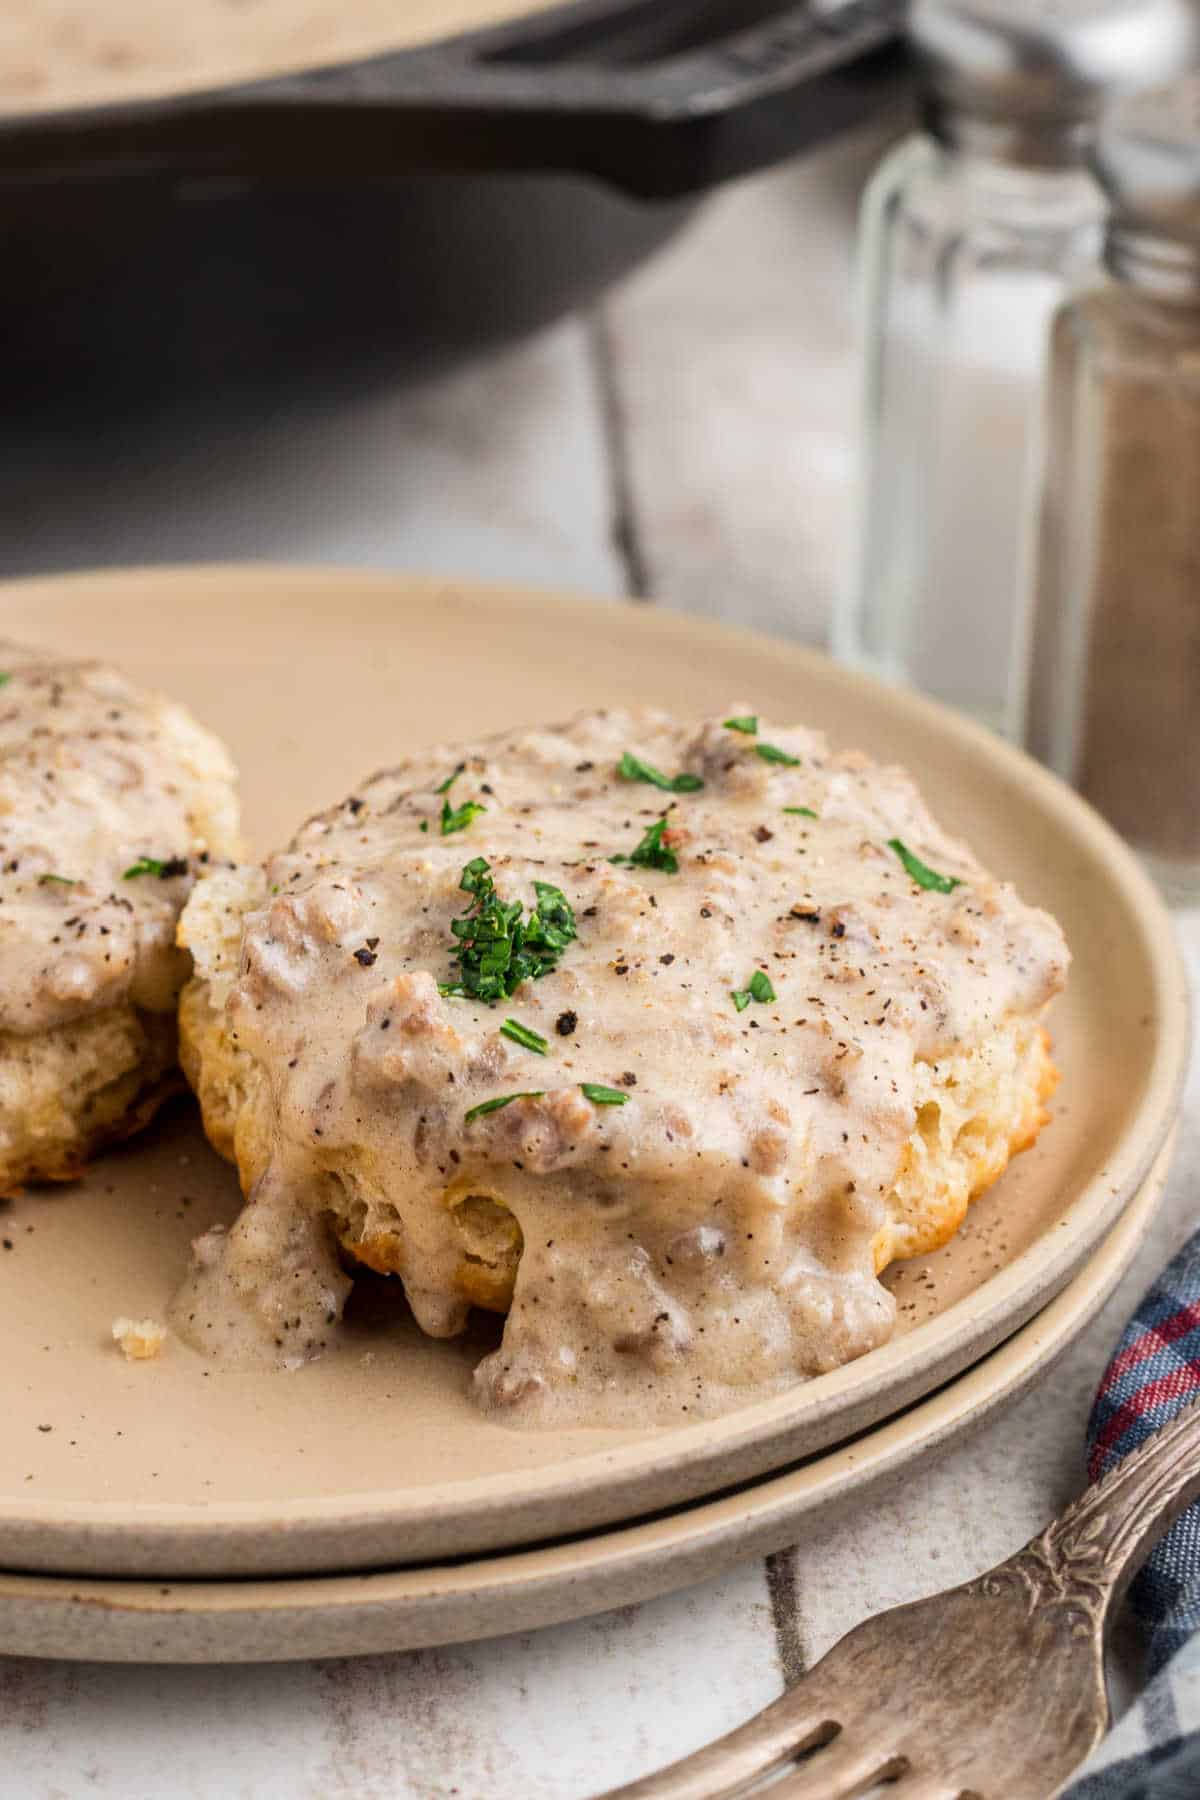 Side shot of biscuits and gravy.